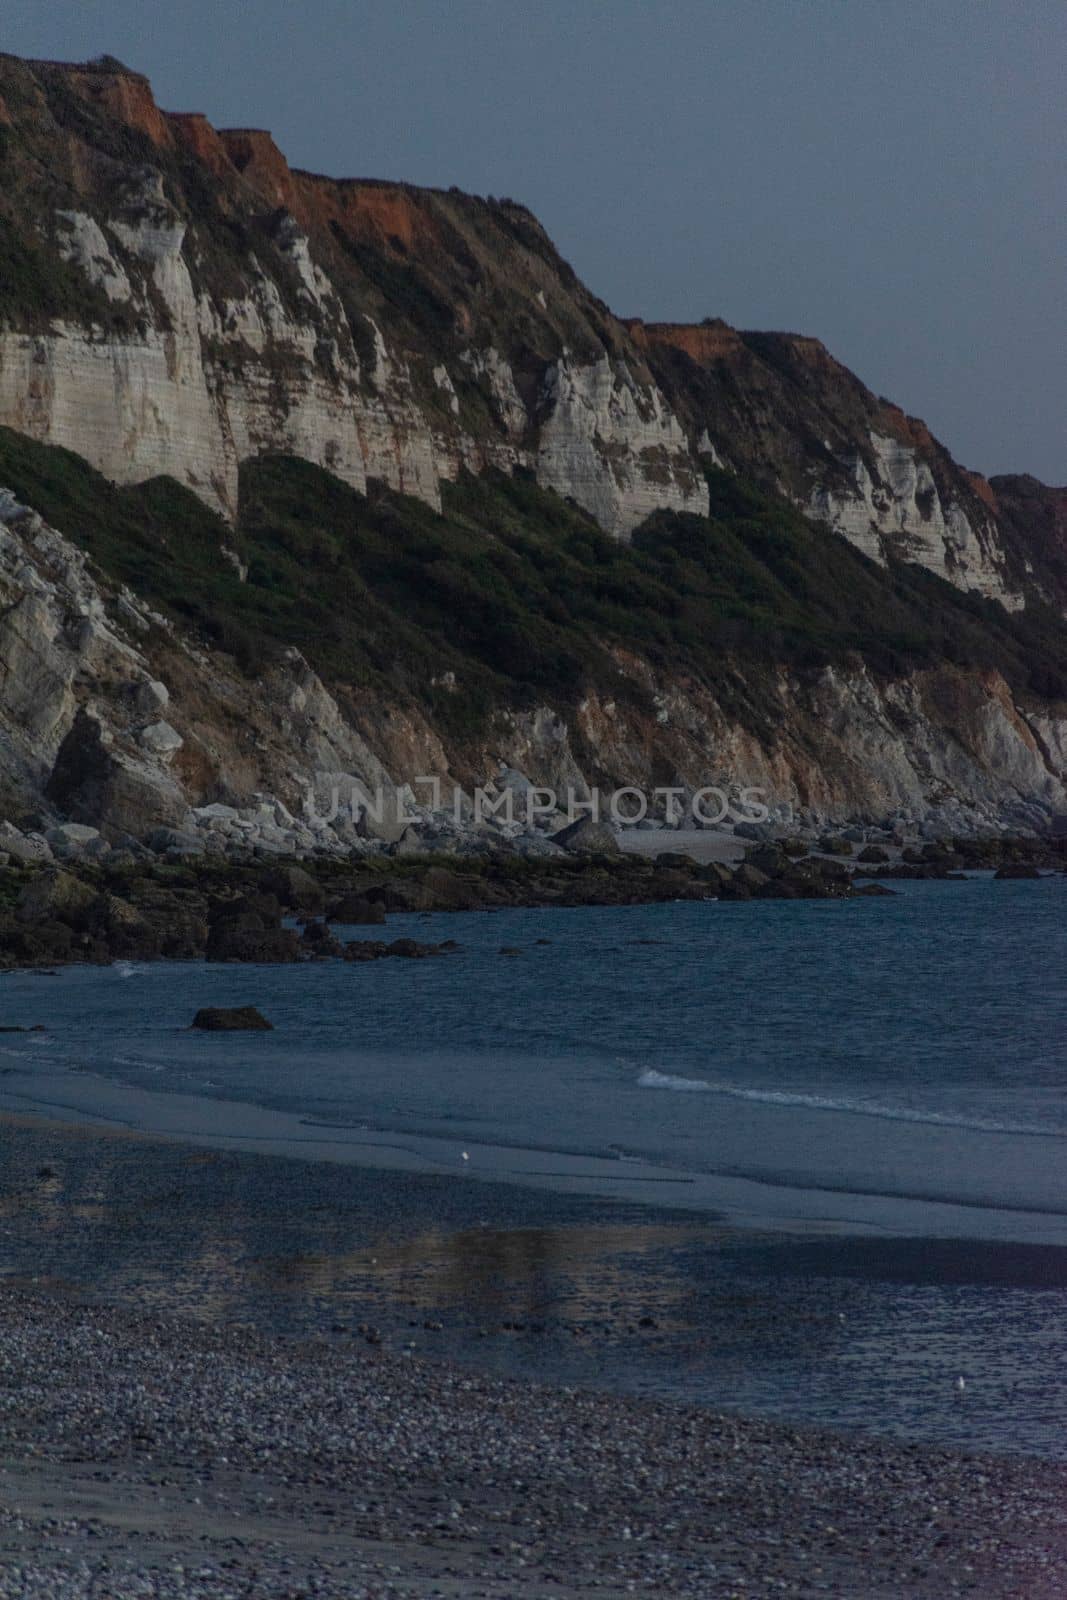 Beach of Saint Jouin Bruneval. In Normandy, France. High quality photo